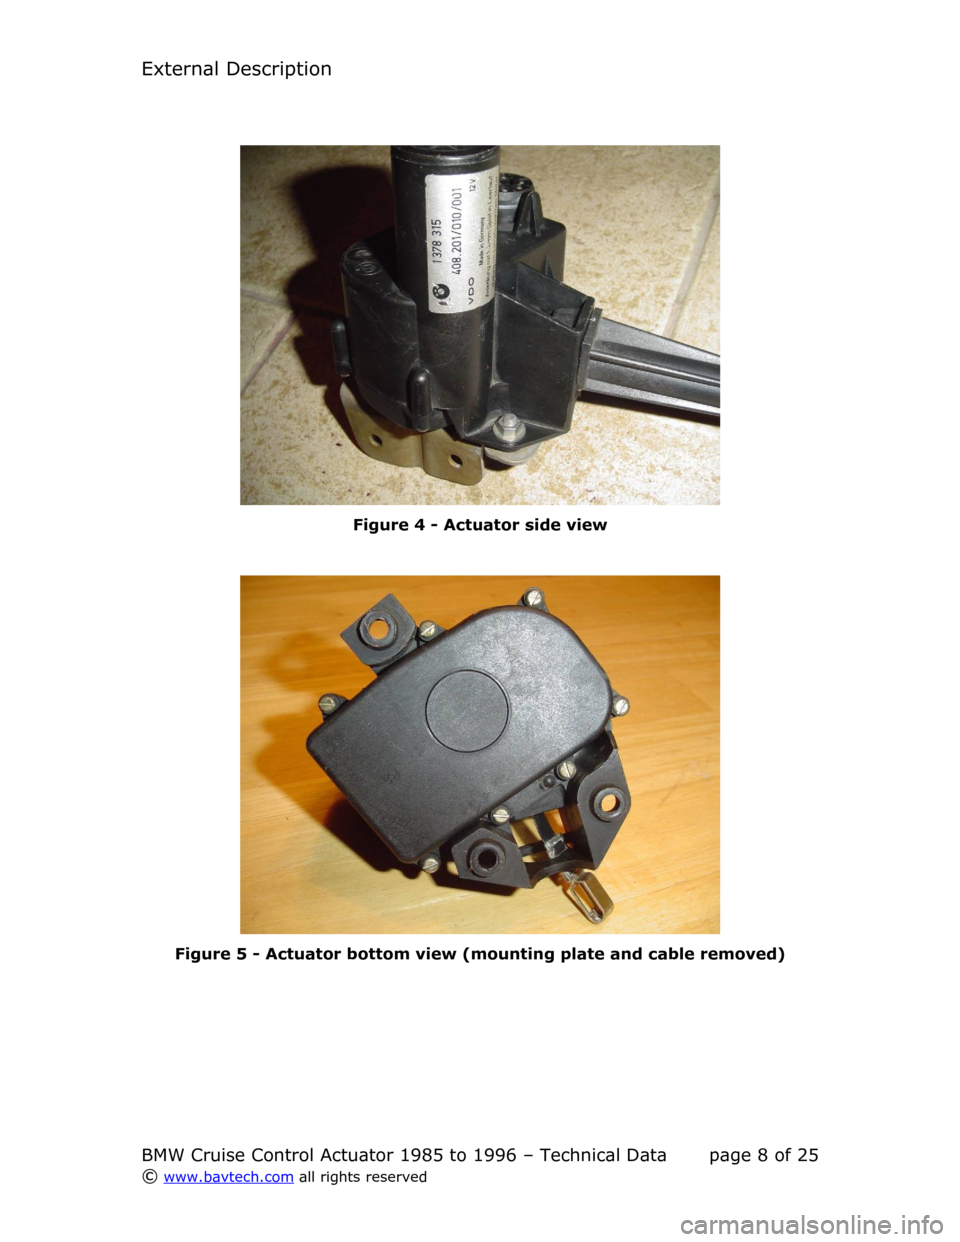 BMW 3 SERIES 1991 E36 Cruise Control Acutator External Description
Figure  4  - Actuator side view
Figure  5  - Actuator bottom view (mounting plate and cable removed)
BMW Cruise Control Actuator 1985 to 1996 – Technical Data page  8  of  25
©